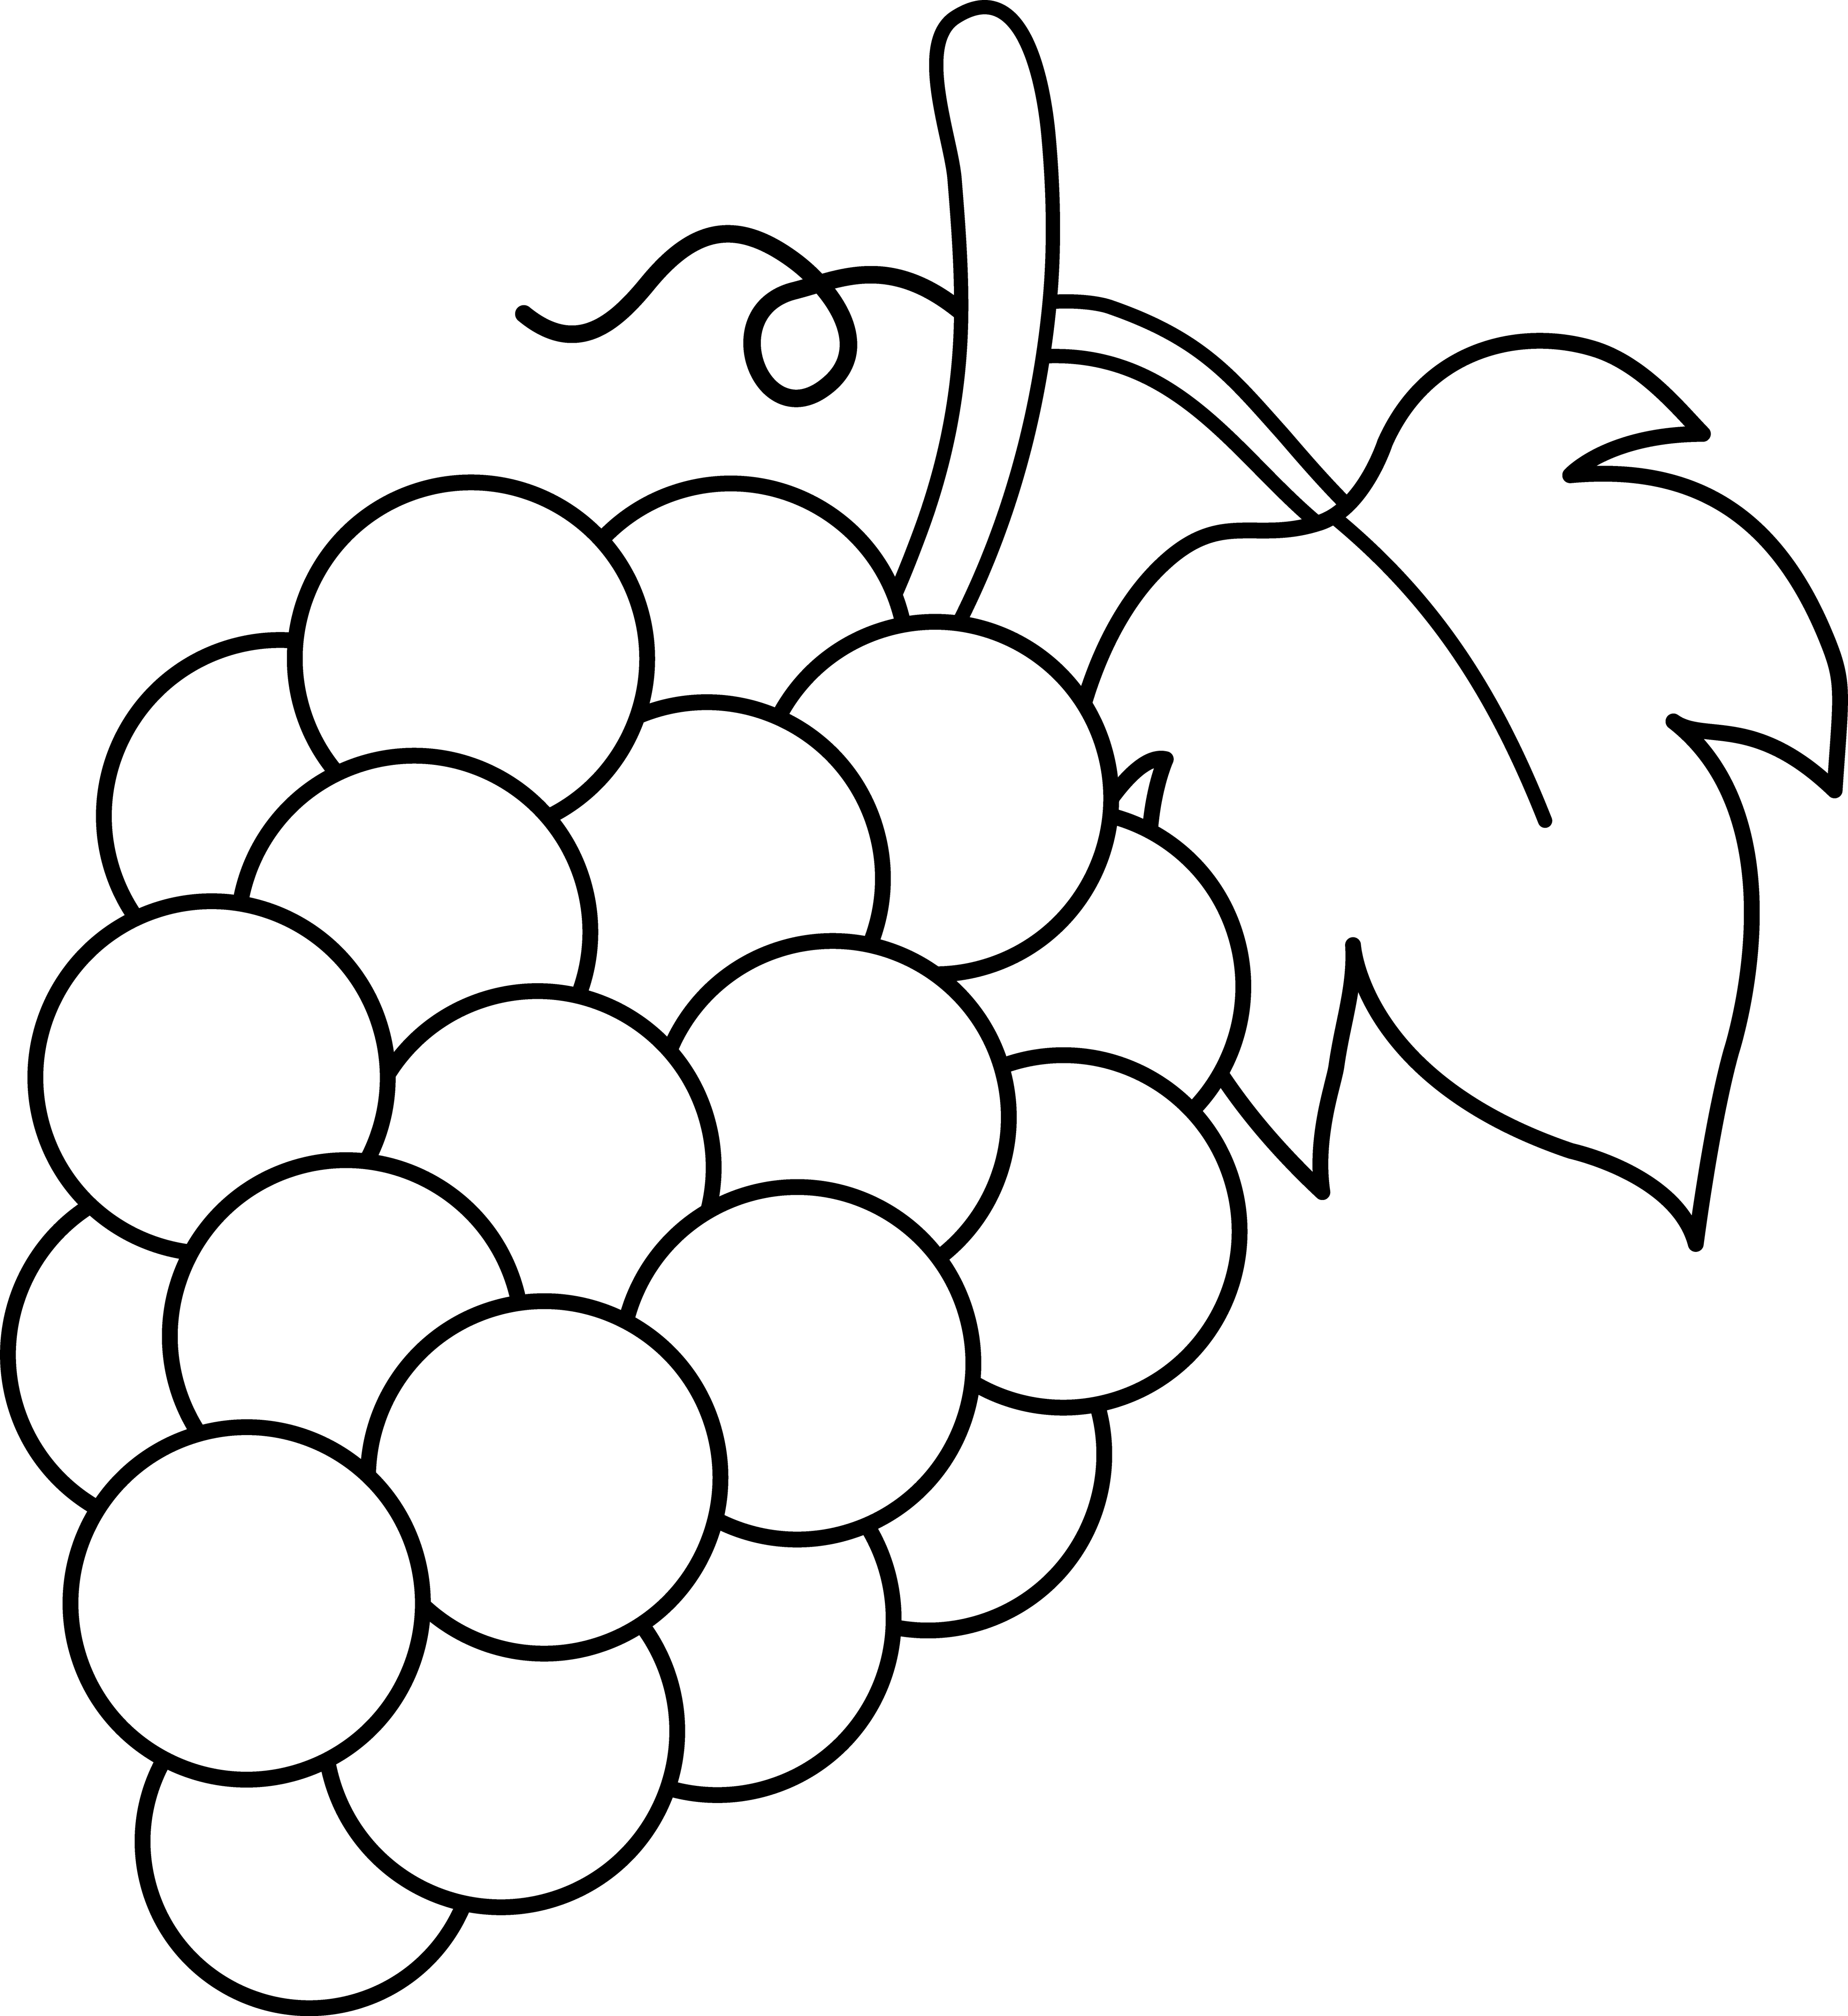 grapes clipart easy draw